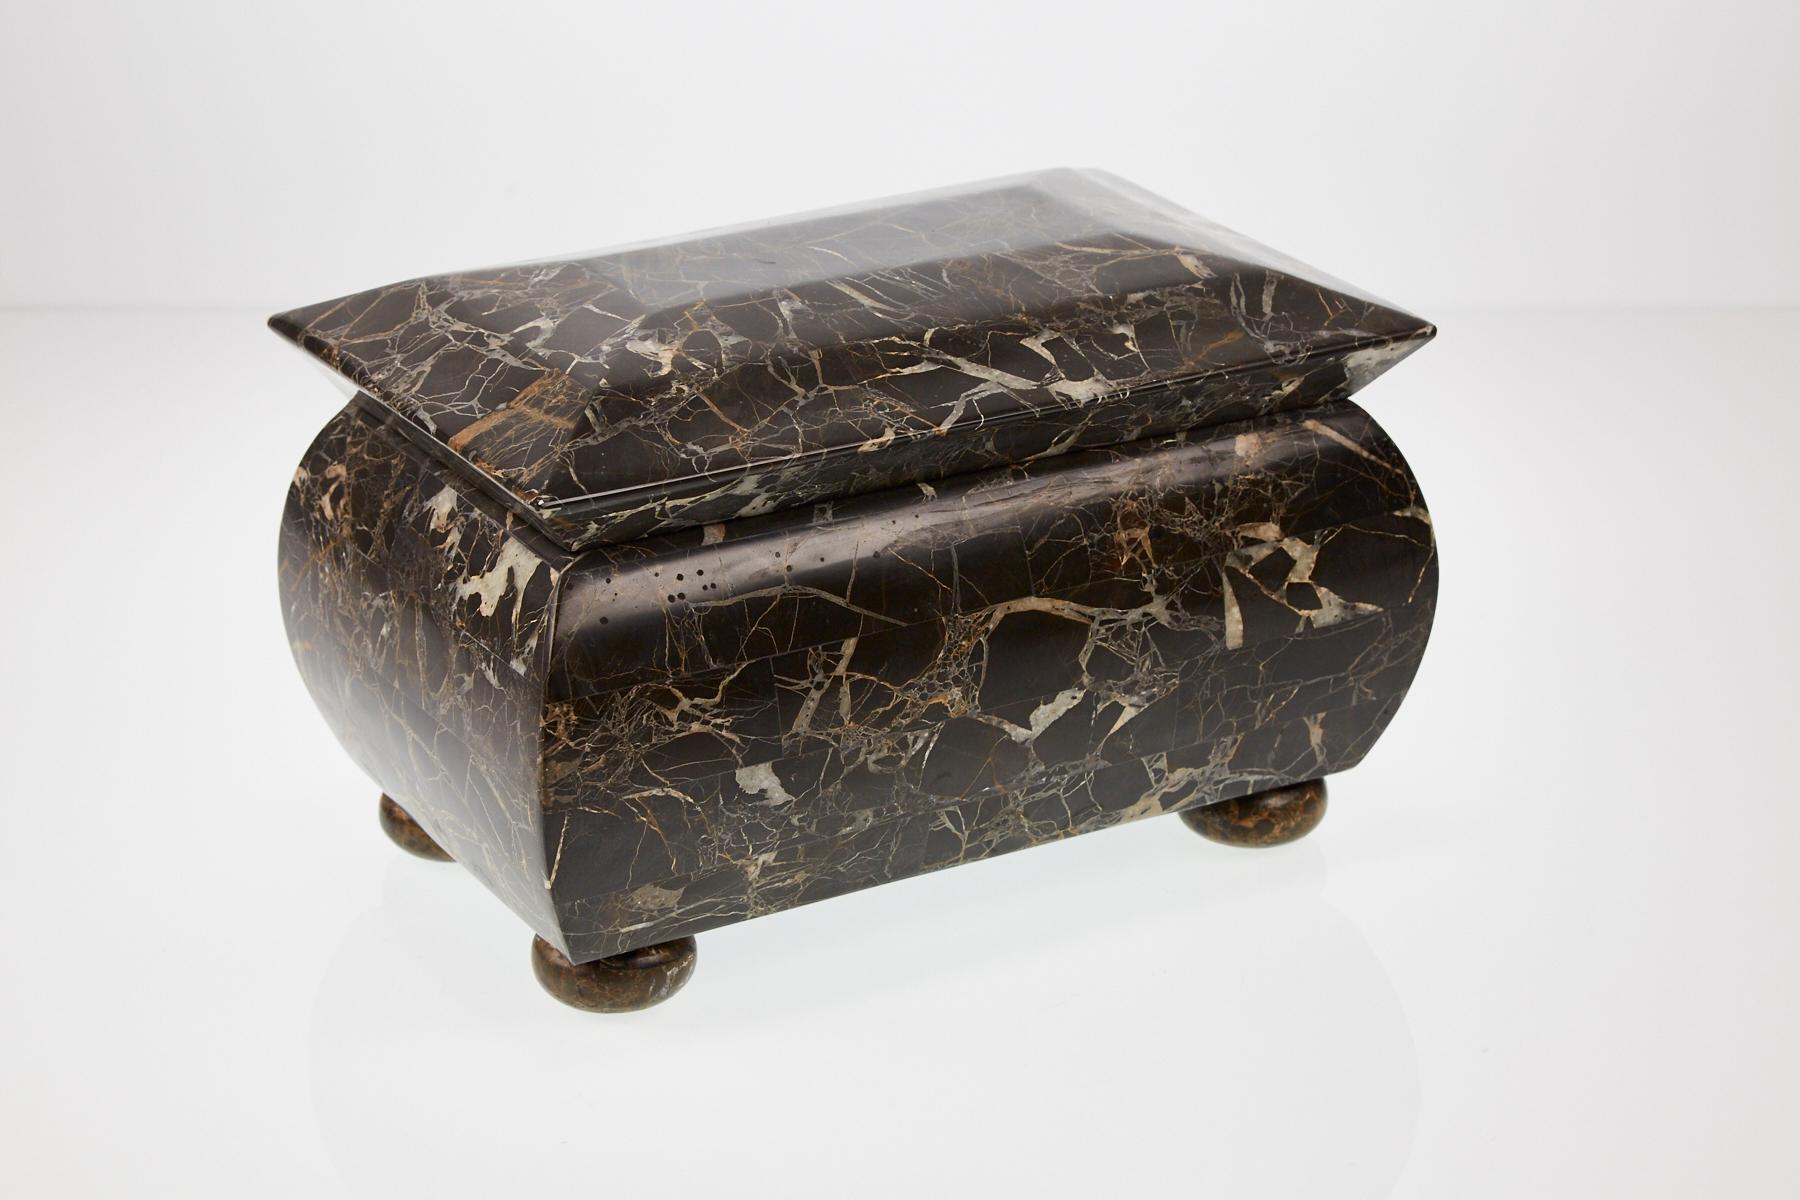 Large hinged box with smooth tessellated snakeskin stone along exterior and wood-lined interior. Perfect tea caddy or decorative trinket box.

All furnishings are made from 100% natural Fossil Stone or Seashell inlay, carefully hand cut and crafted